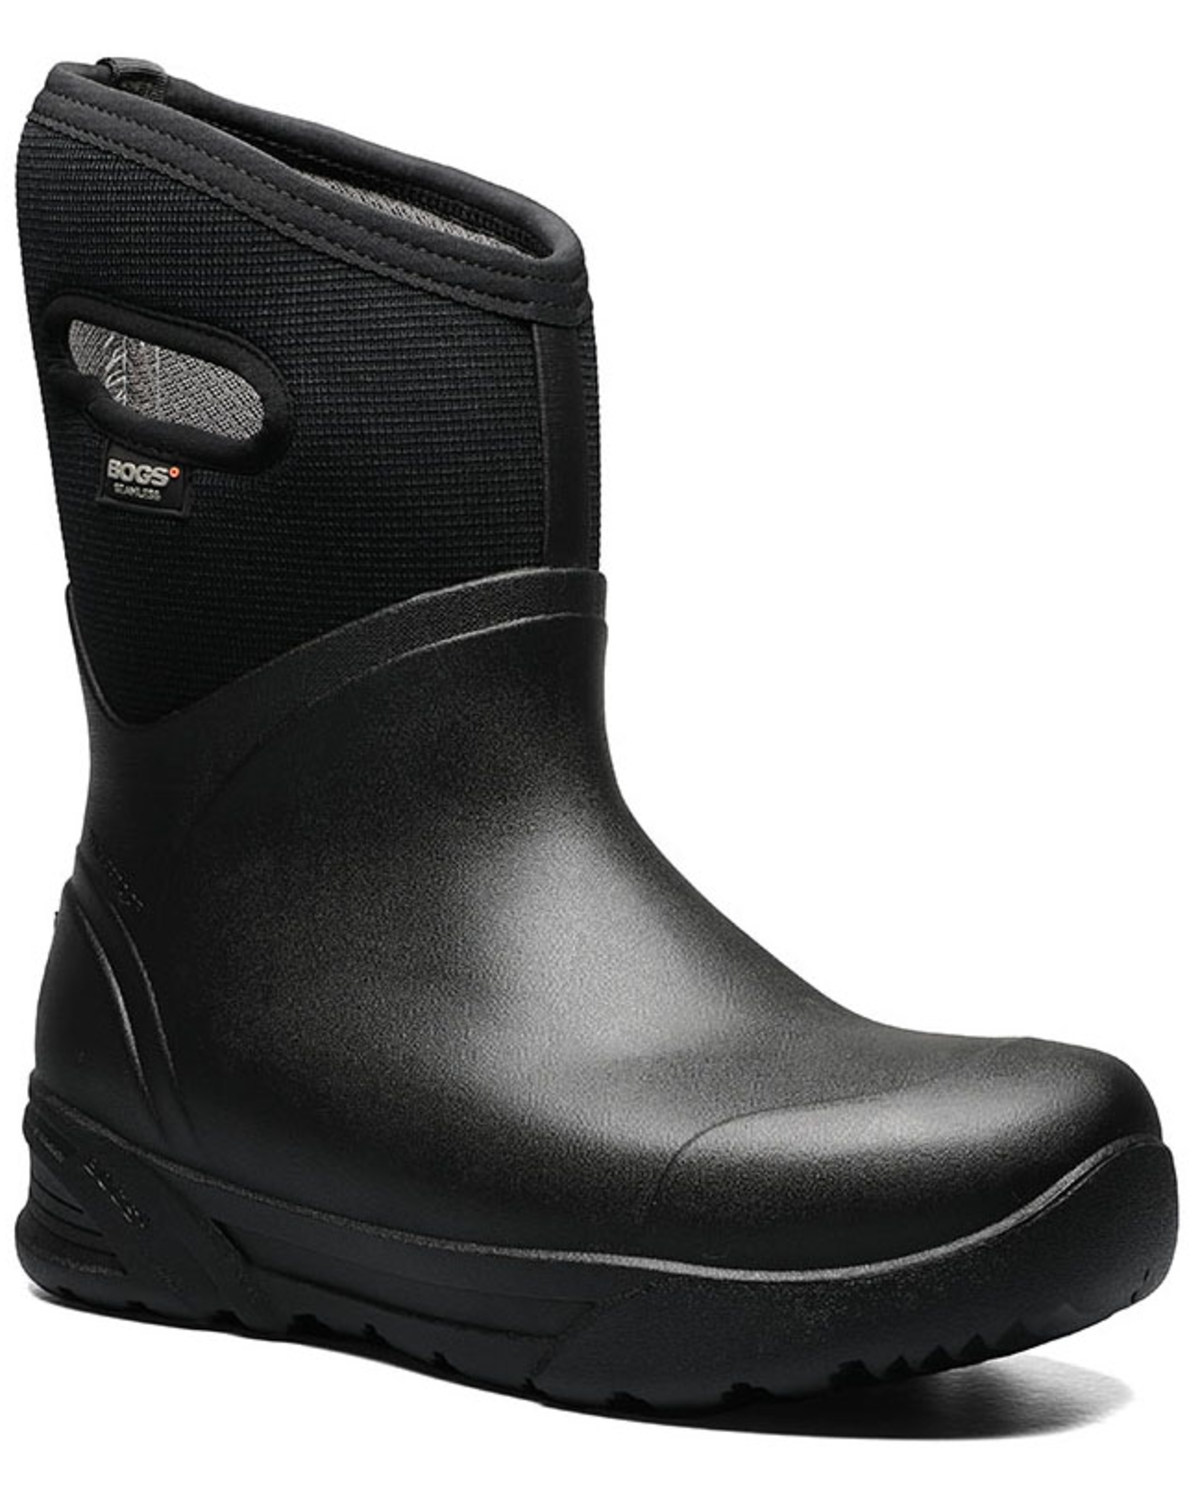 Bogs Men's Bozeman Mid Insulated Work Boots - Soft Toe